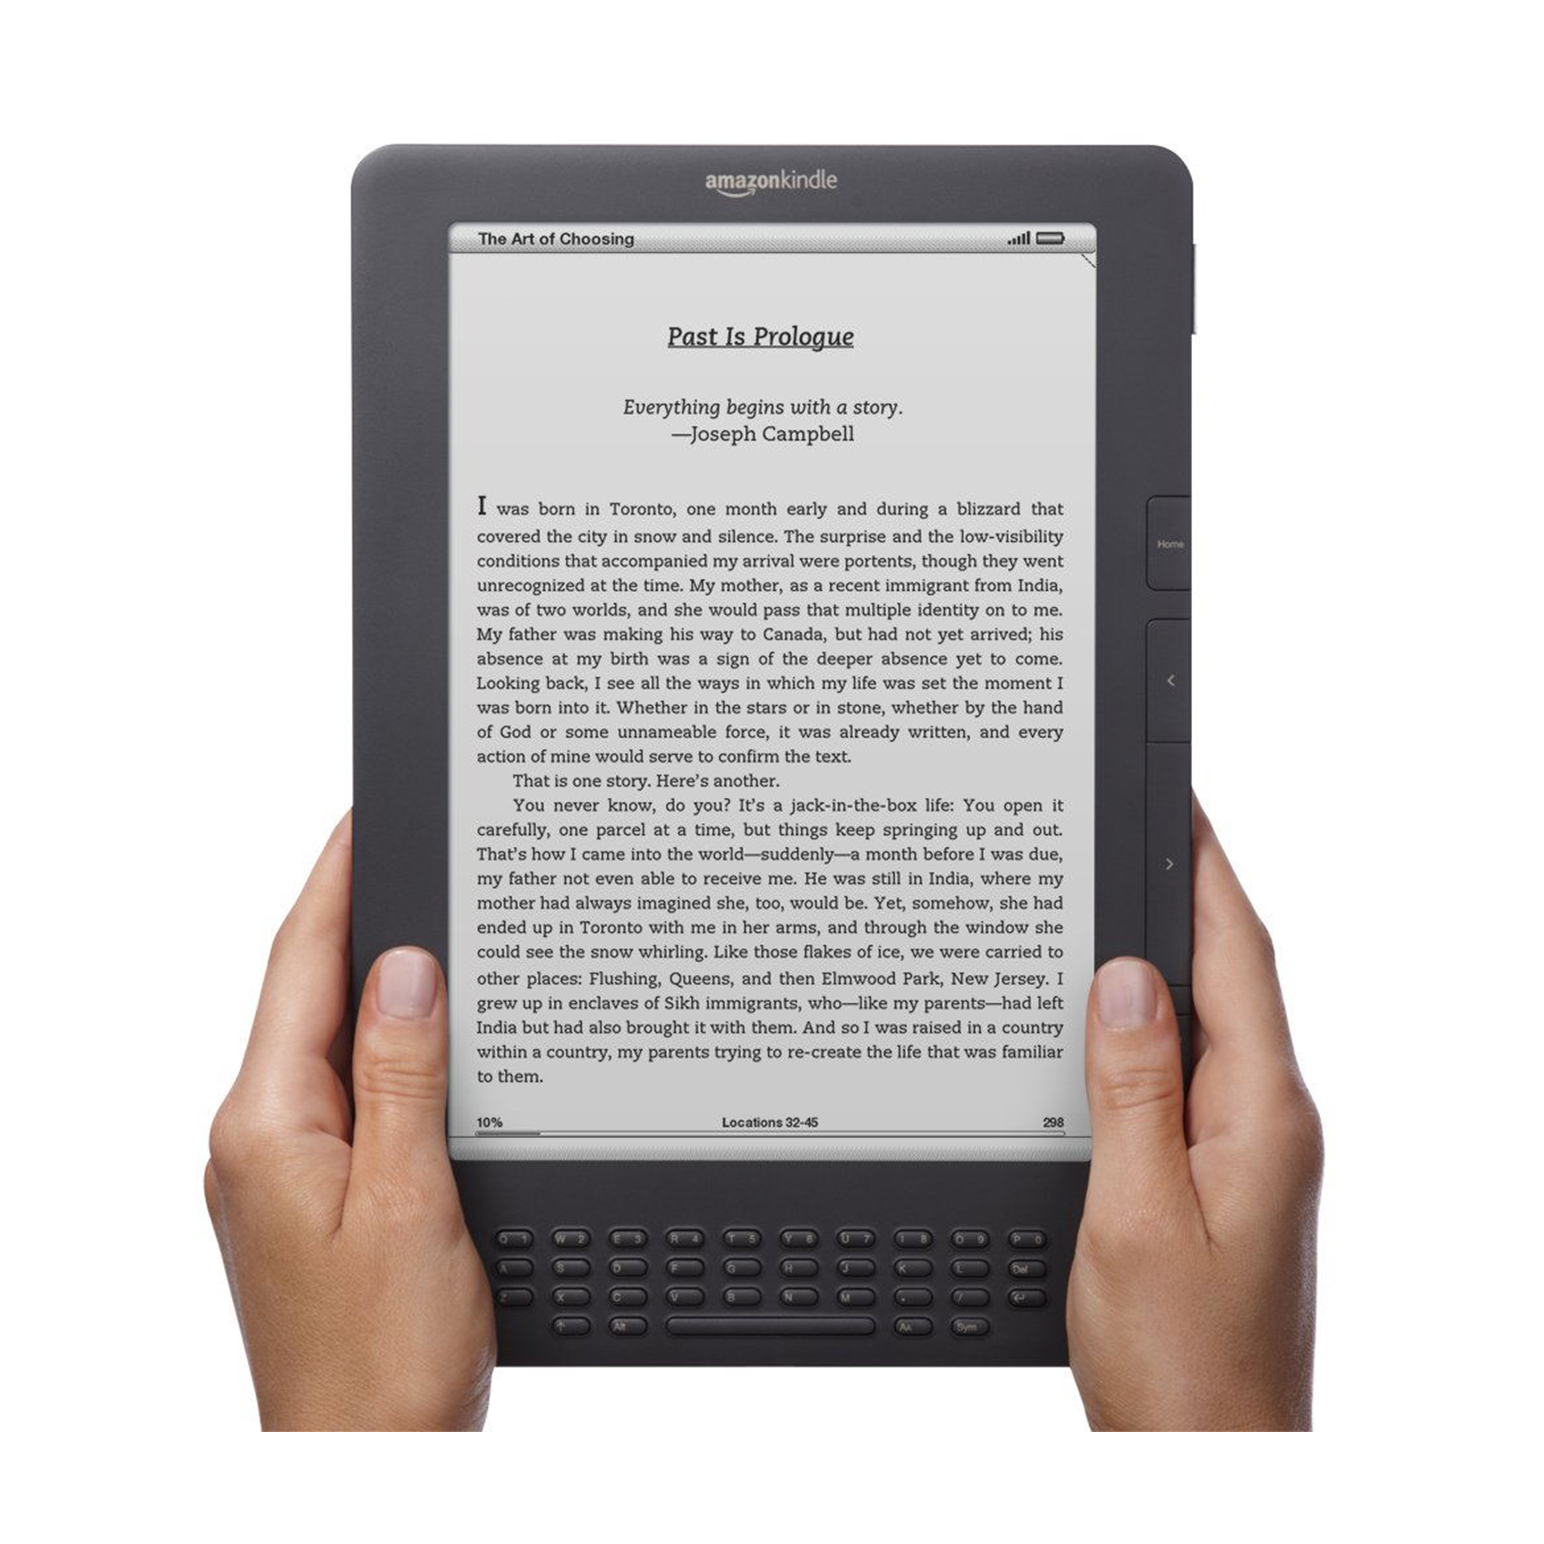 amazon kindle serial number check stolen